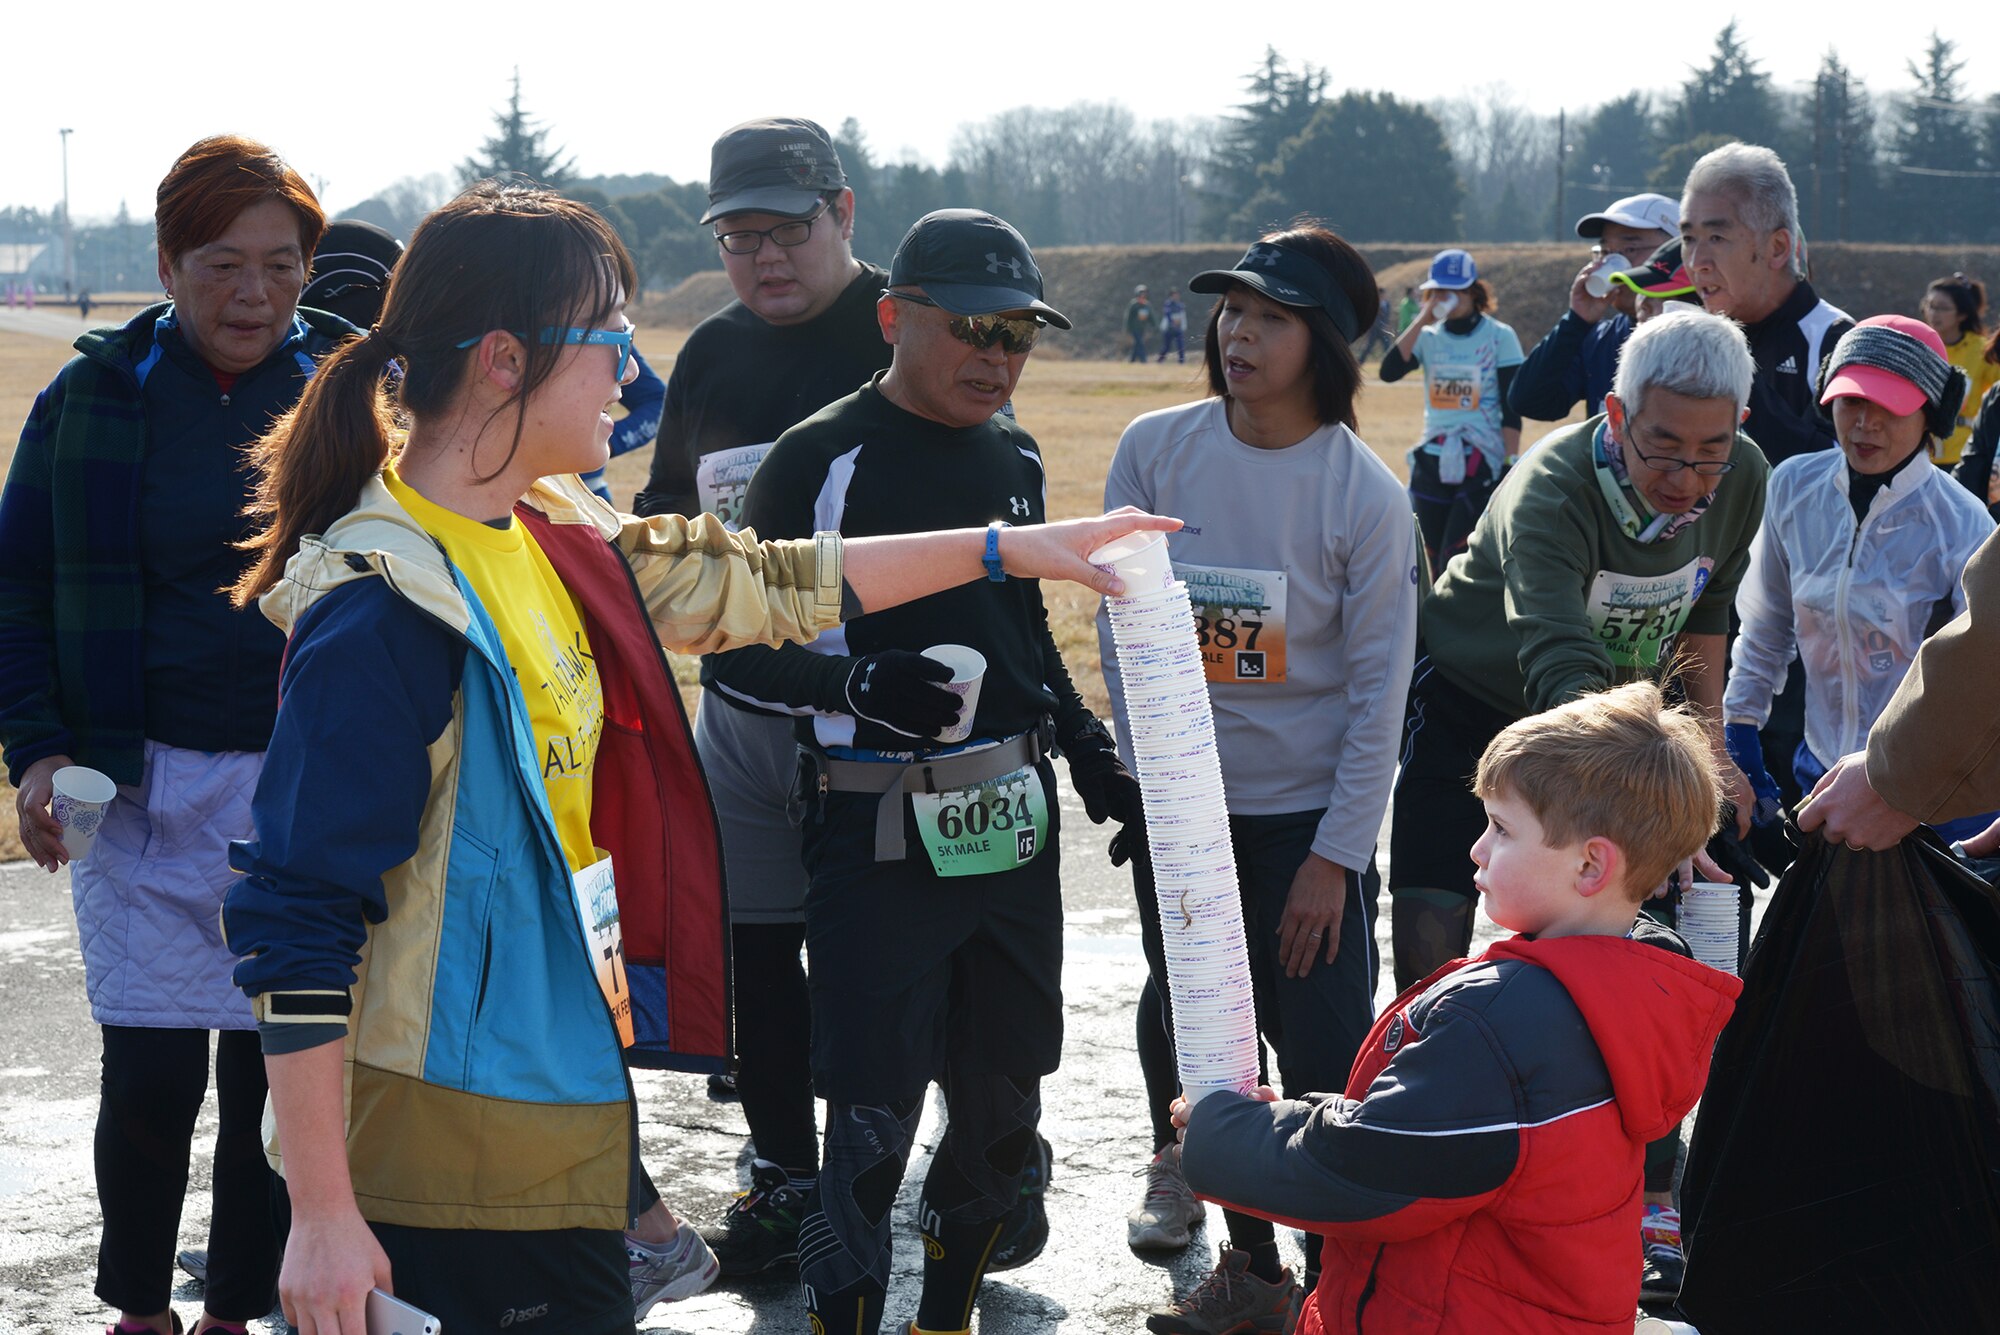 A participant gives her used water cup to a volunteer's child during the 35th Annual
Frostbite Run at Yokota Air Base, Japan, Jan. 17, 2016. Dozens of community
members at Yokota came together to make the annual event a success. (U.S. Air Force
photo by Staff Sgt. Cody H. Ramirez/Released)